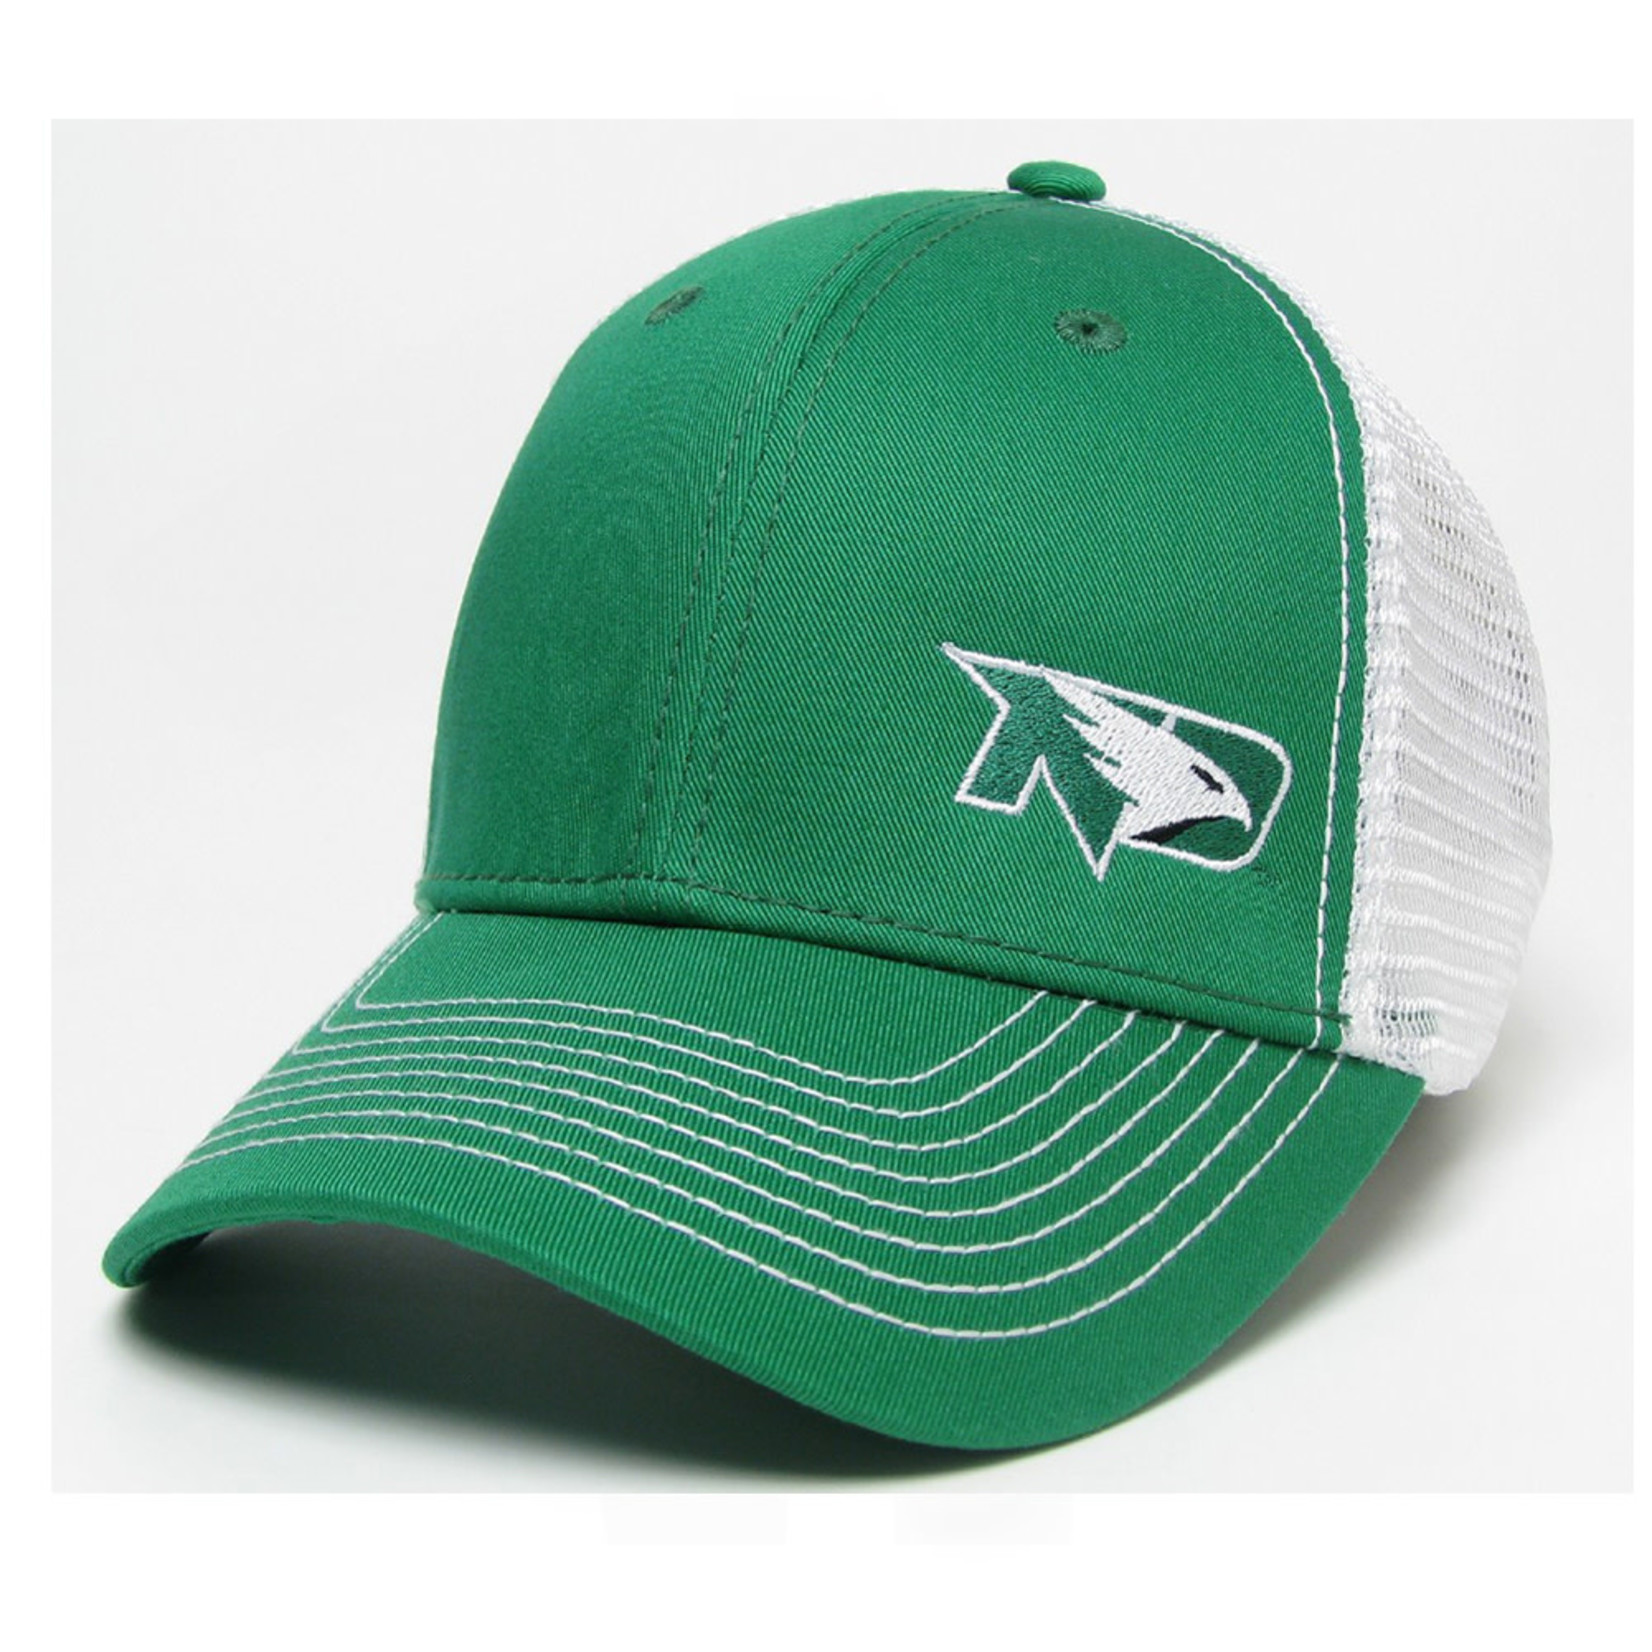 L2Brands Legacy Primary Marker Hat - Kelly